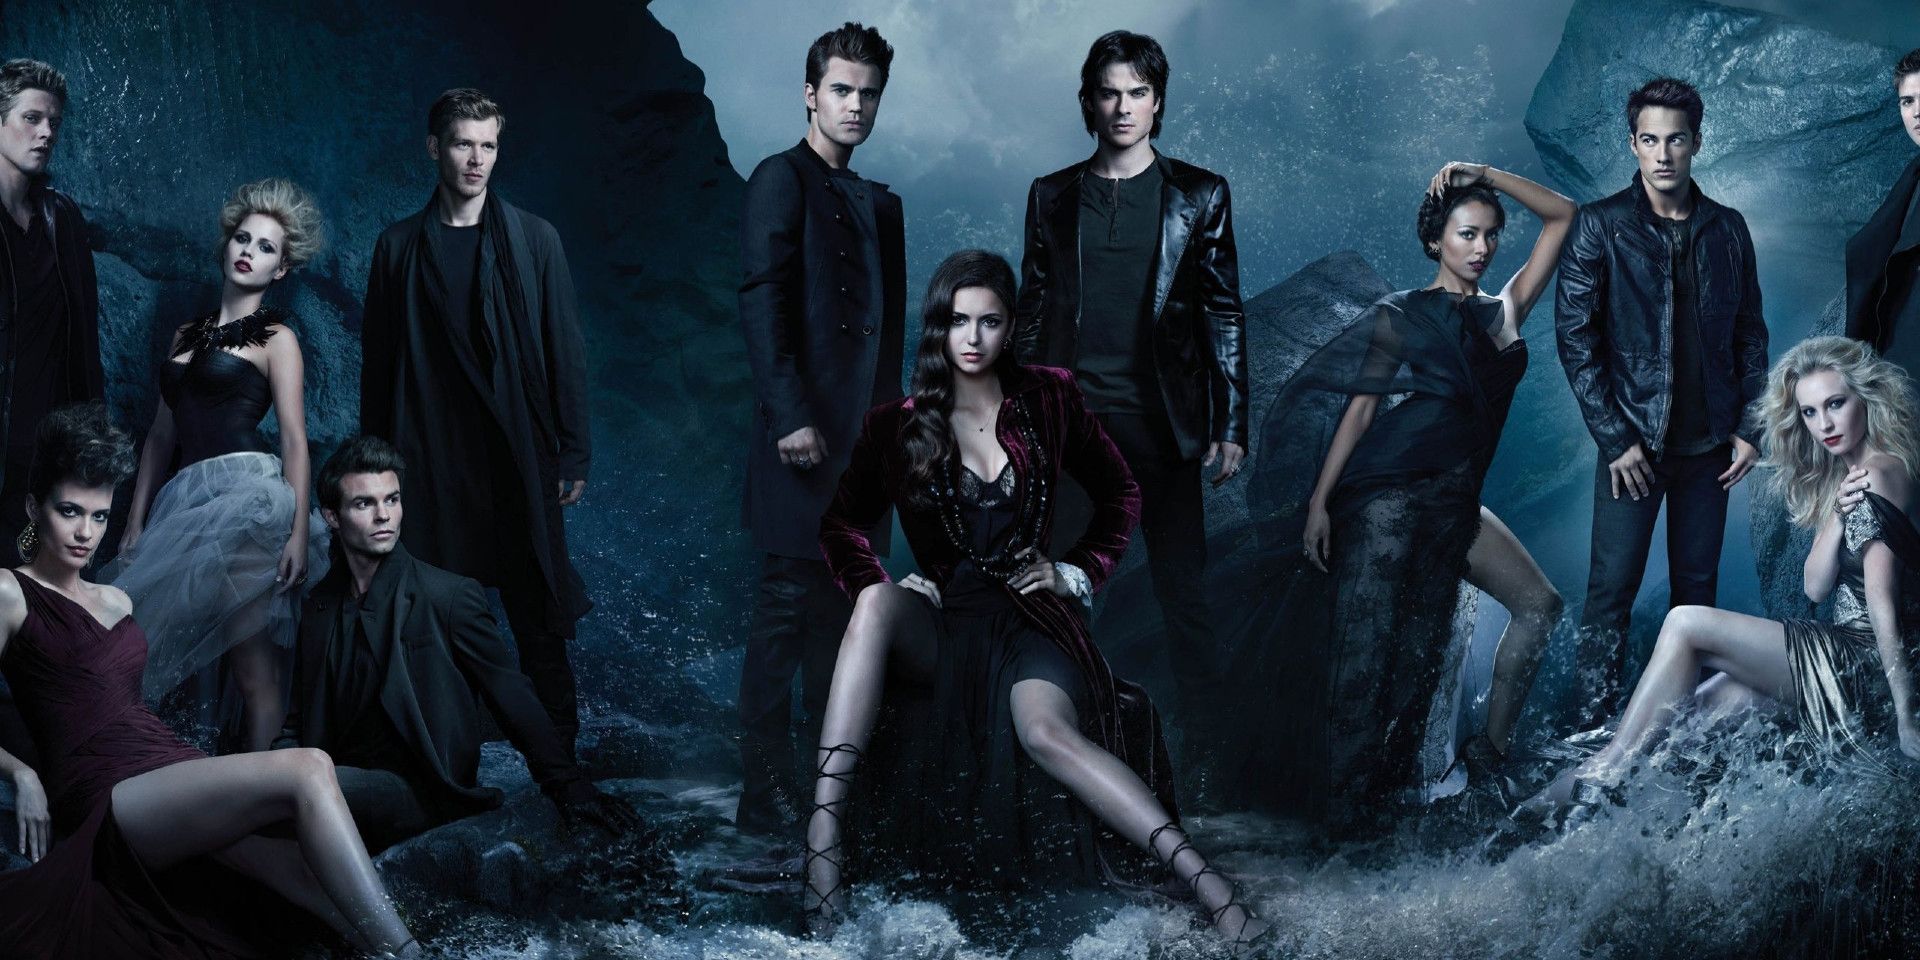 The cast of The Vampire Diaries pose near the ocean.